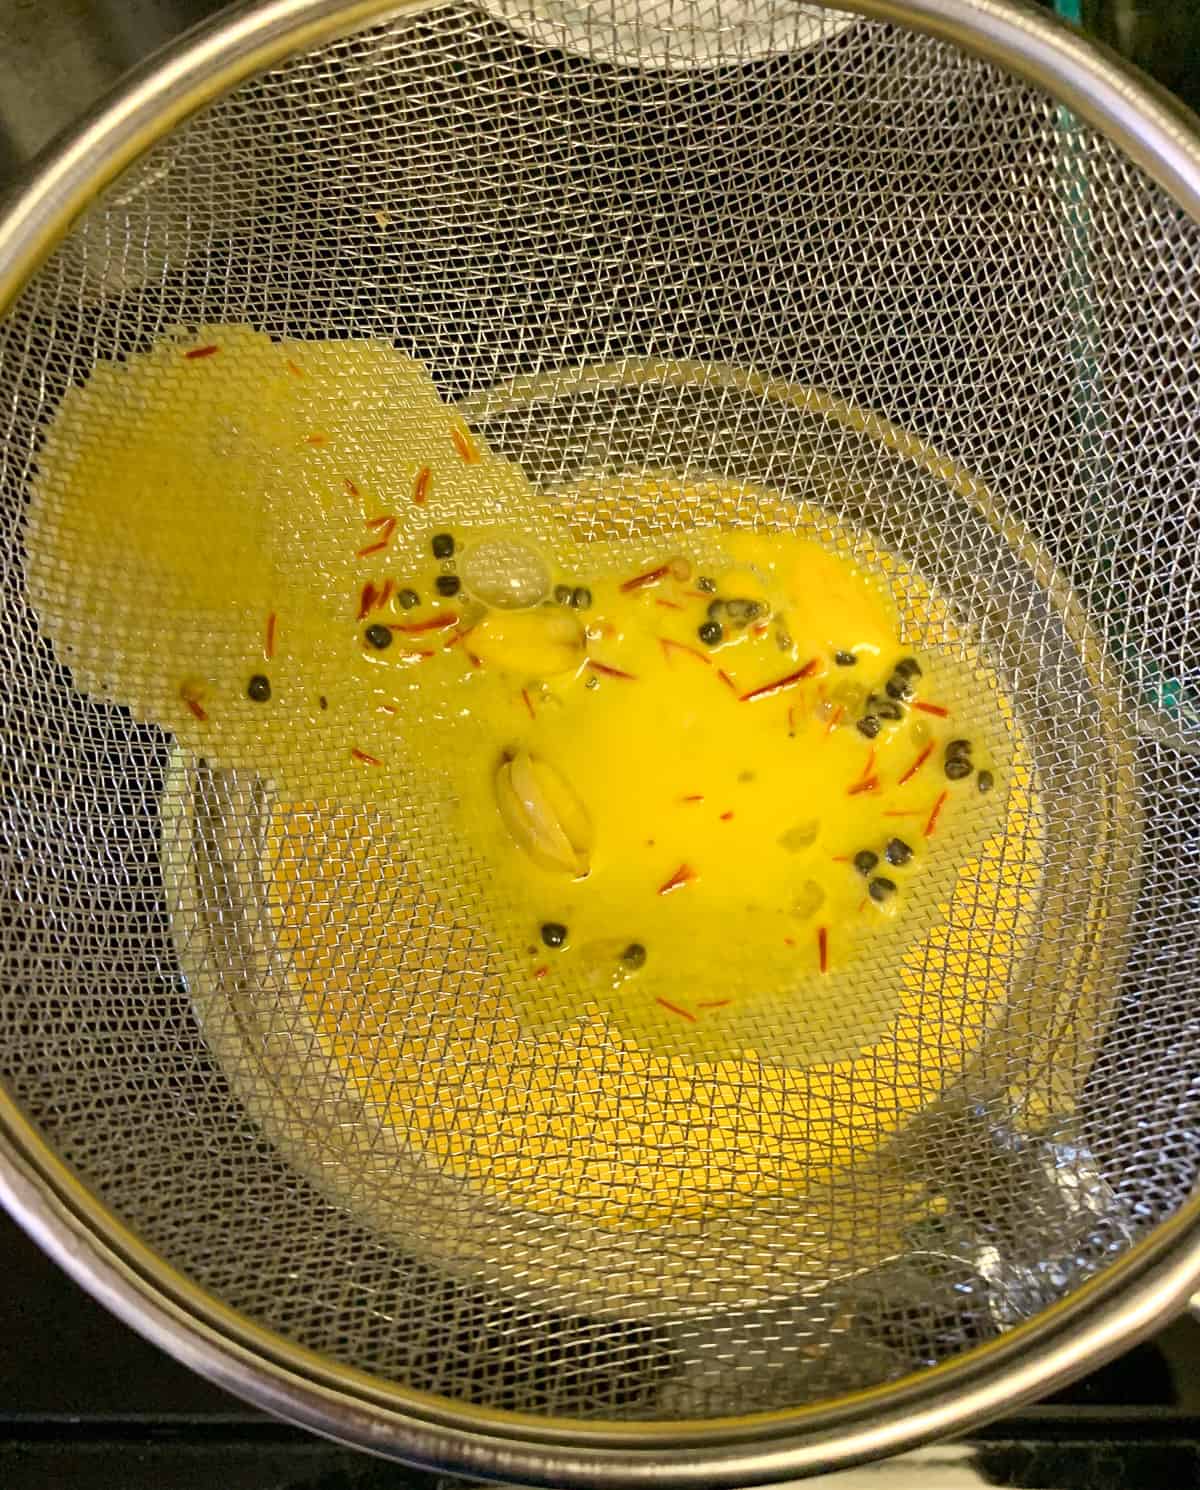 Passing the mixture through a sieve 